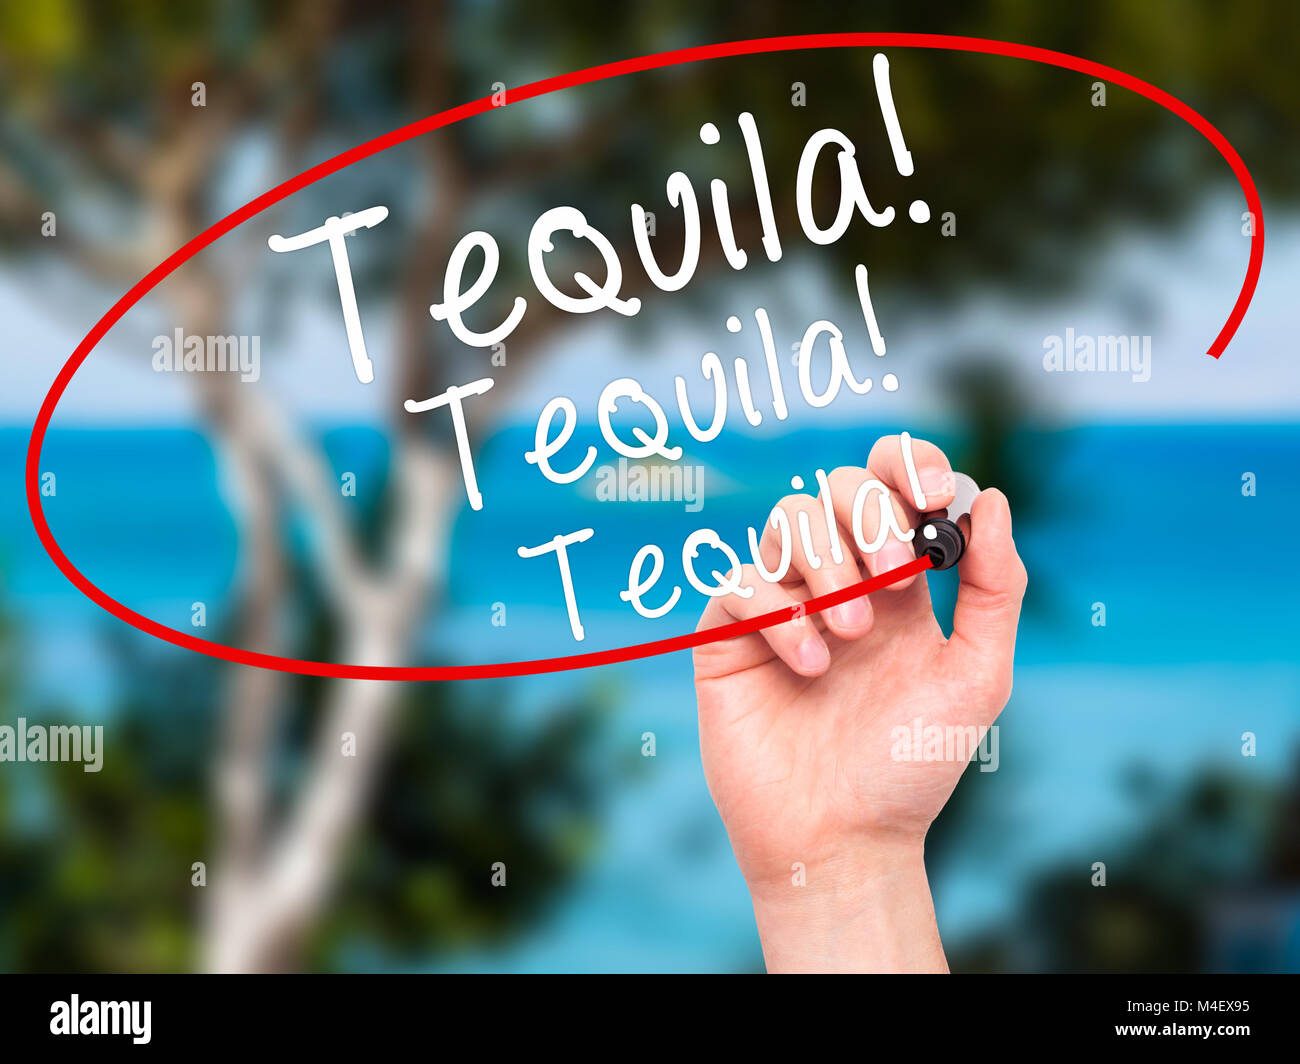 Man Hand writing Tequila with black marker on visual screen Stock Photo